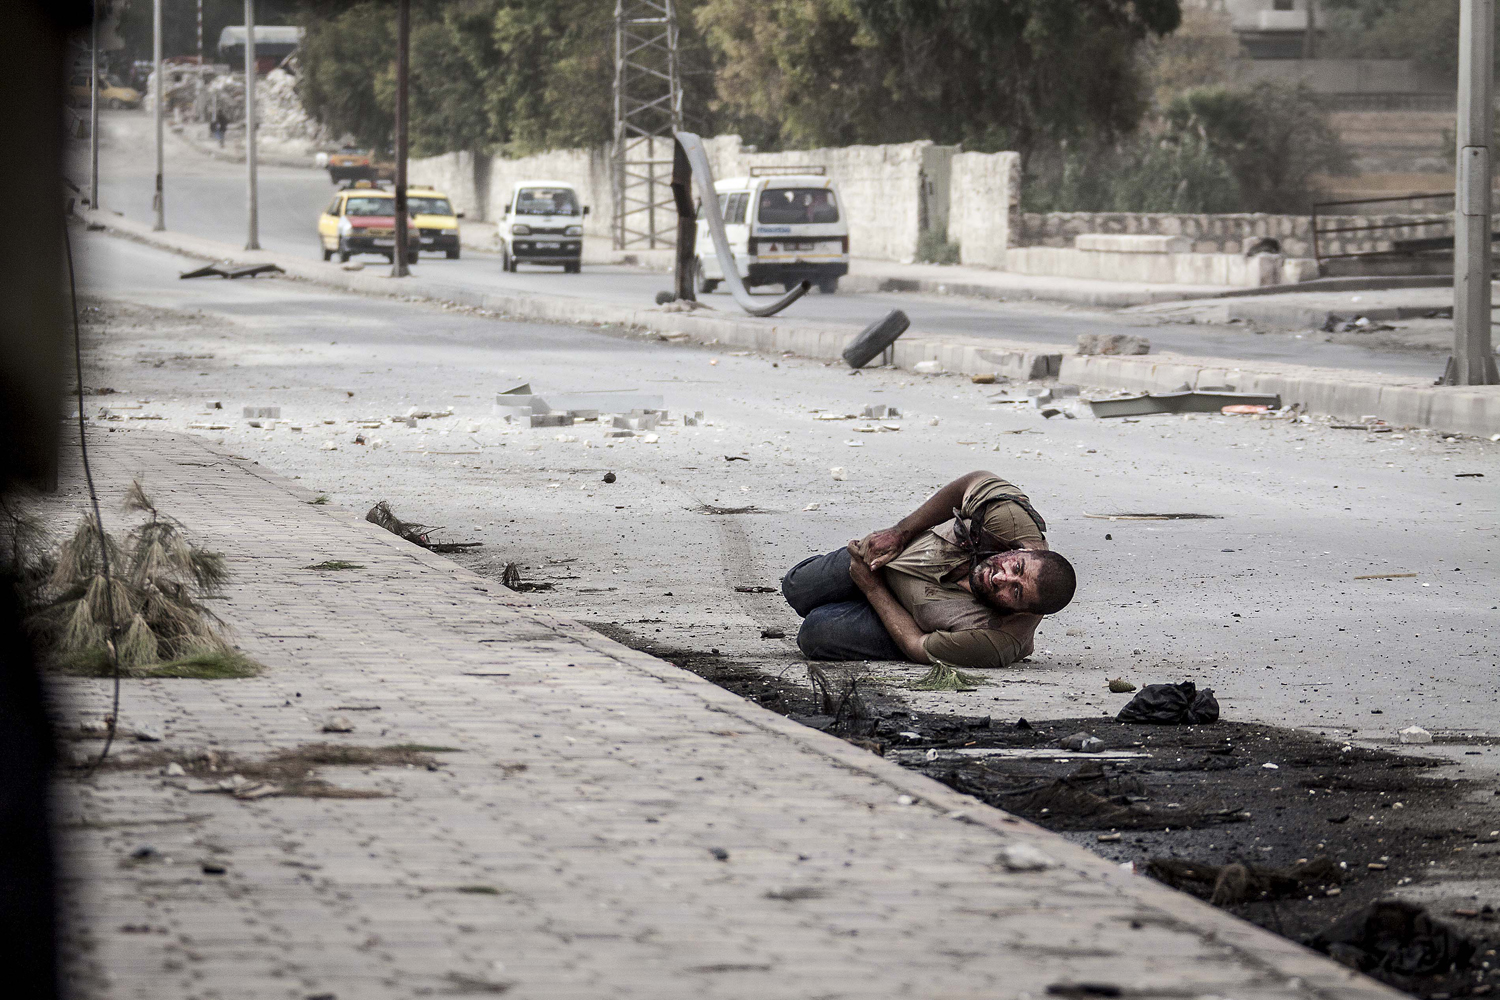 Image: Oct. 20, 2012. A wounded Syrian civilian lies in the street with a shot to his stomach as he tries to escape the line-of-fire after he was targeted by a Syrian army sniper in Aleppo, Syria.